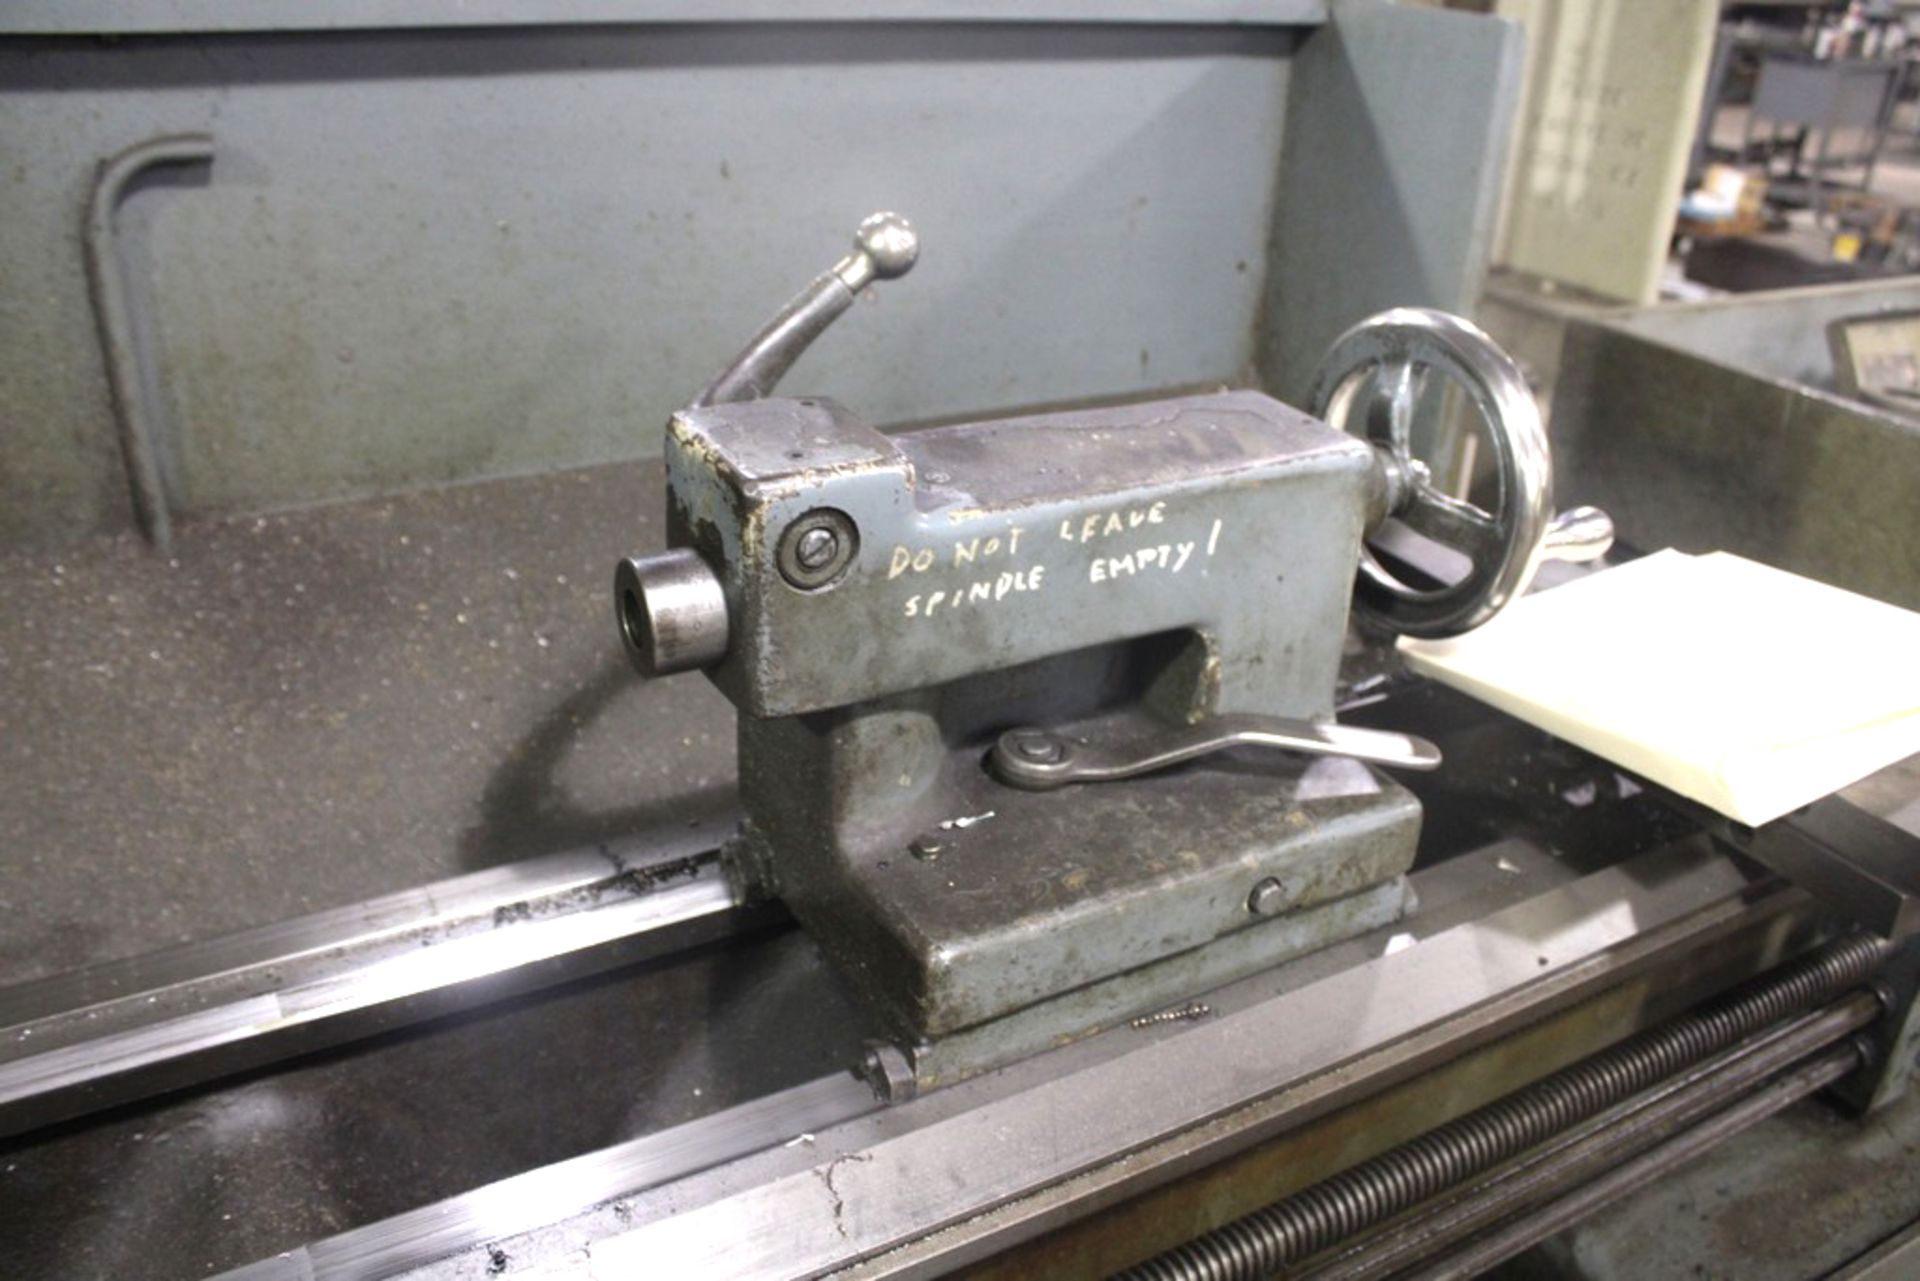 LEBLOND 15”X54” MODEL REGAL TOOLROOM LATHE, S/N 10C407, 1800 RPM SPINDLE, WITH 10” 6 - JAW CHUCK - Image 5 of 9